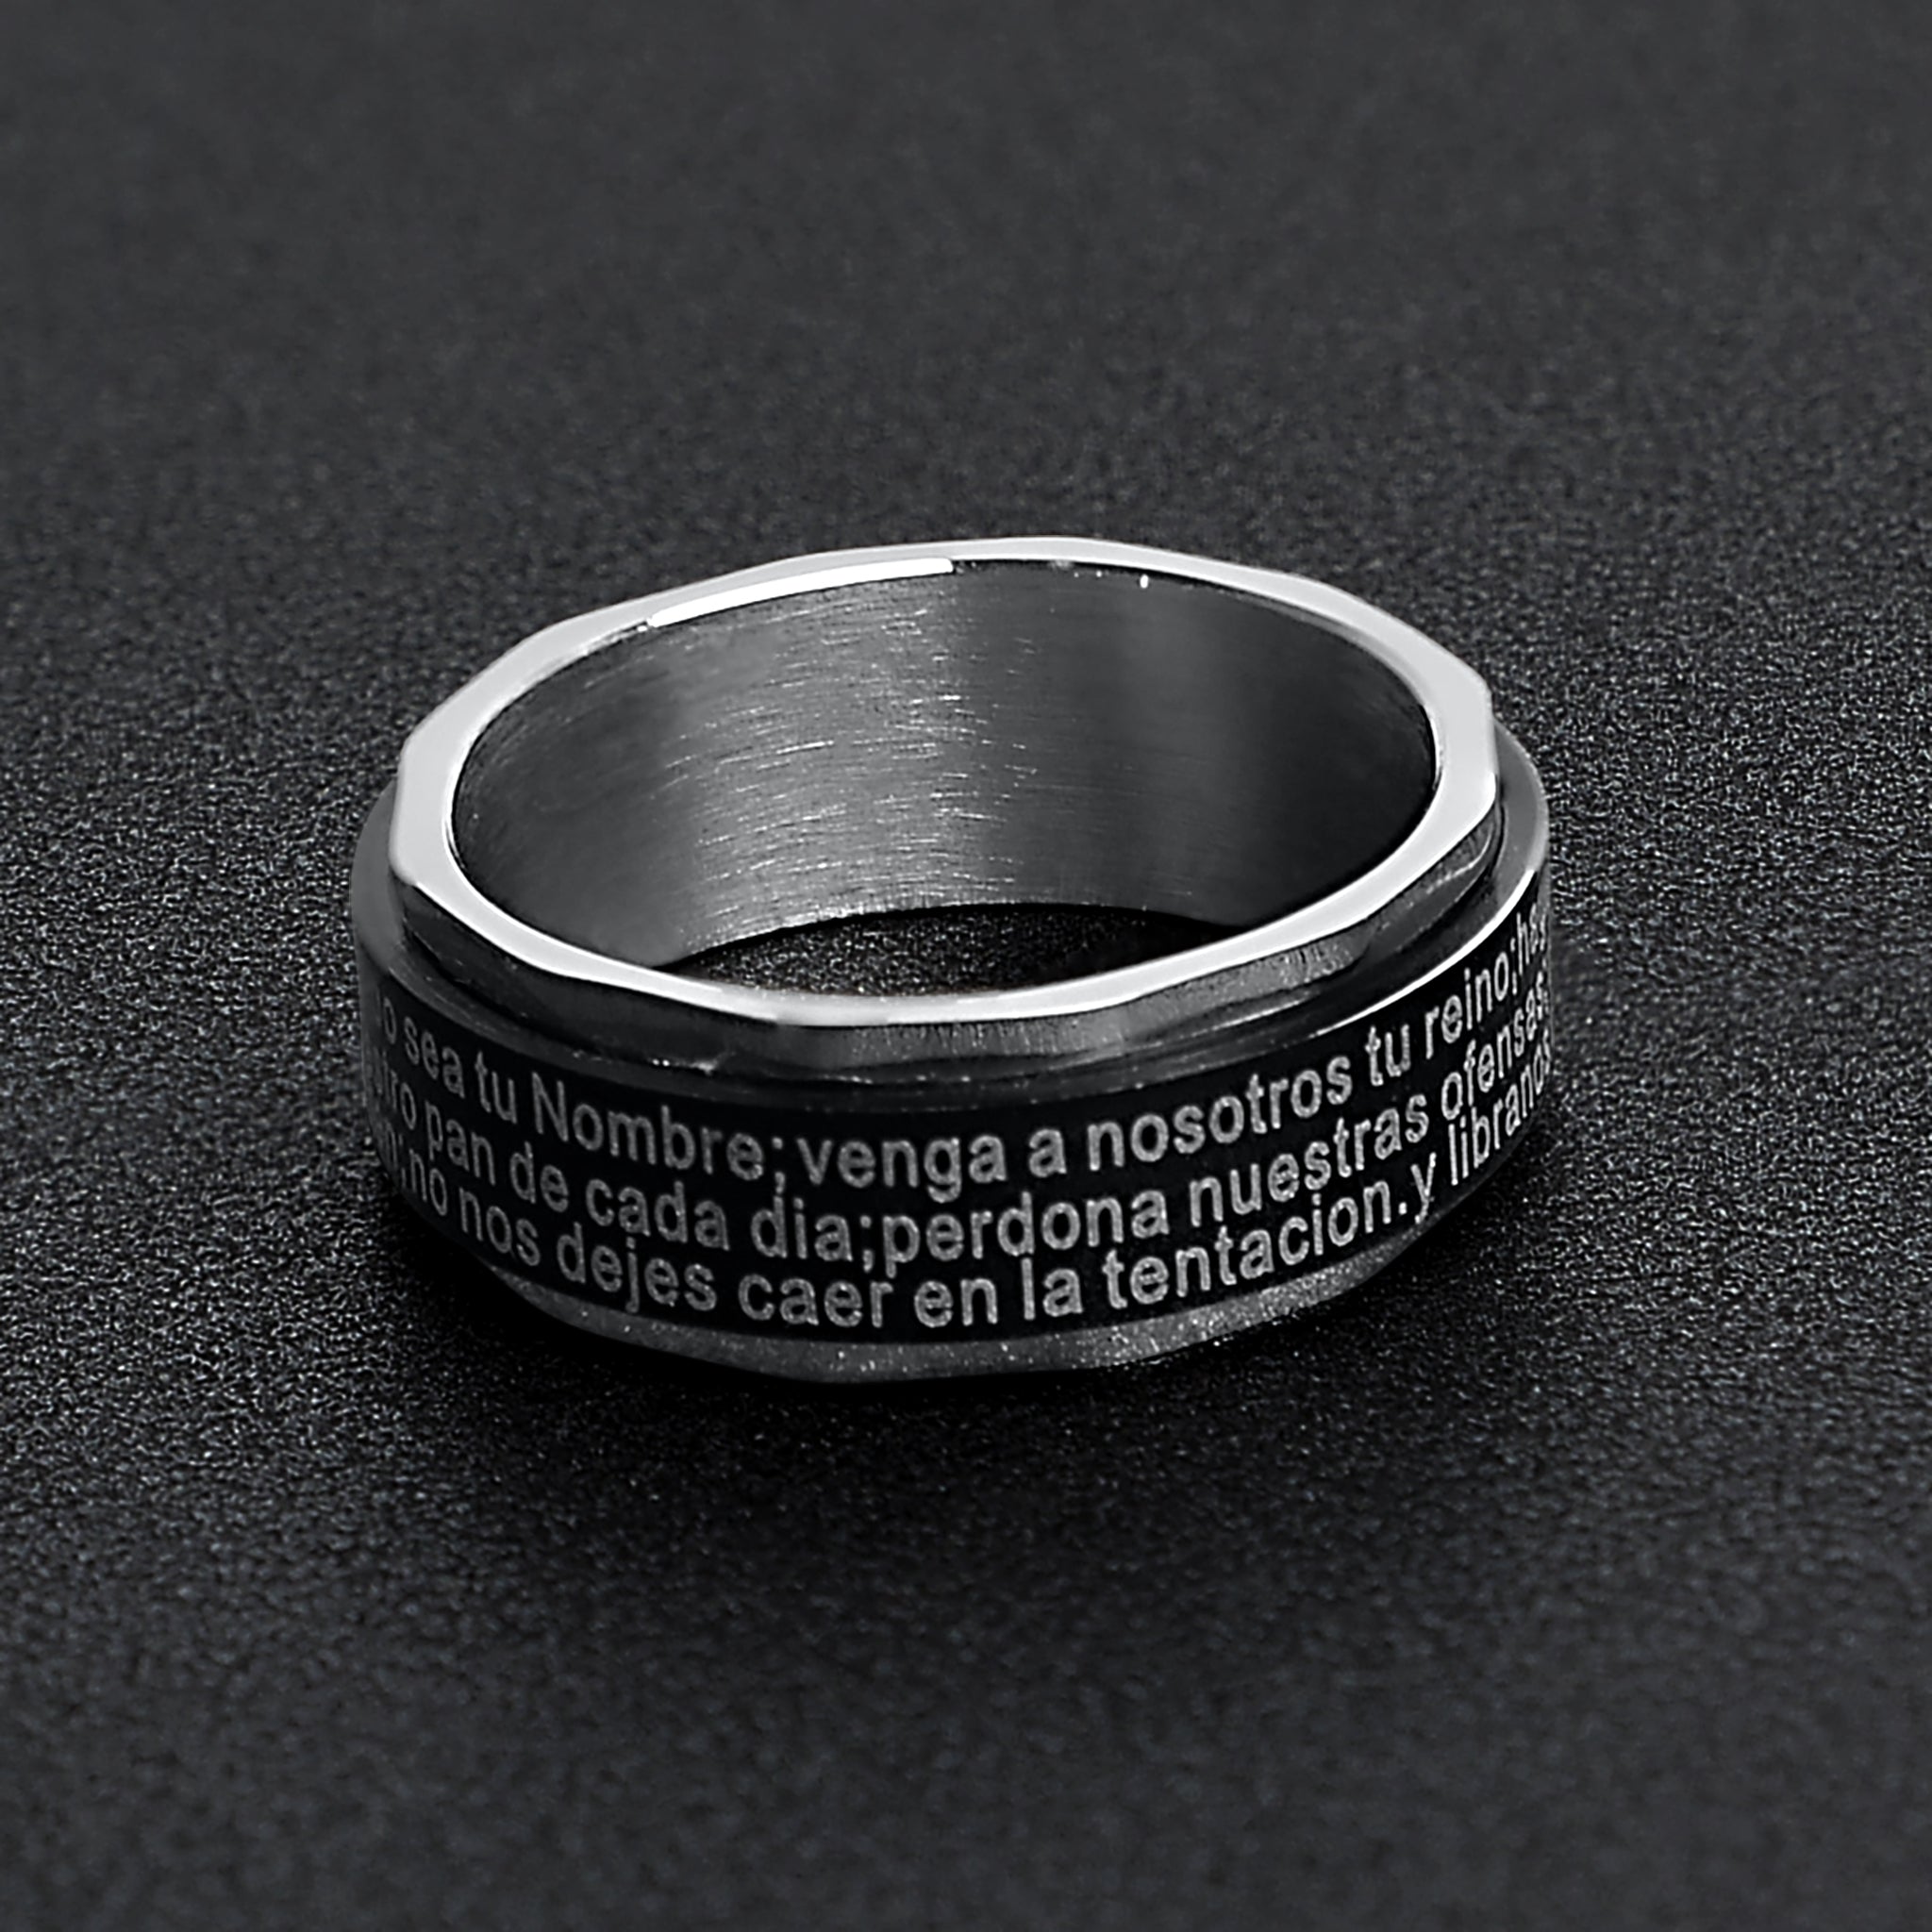 Black Stainless Steel Spanish Lord's Prayer Spinner Ring - Unique and Stylish Faith Jewelry Bijou Her